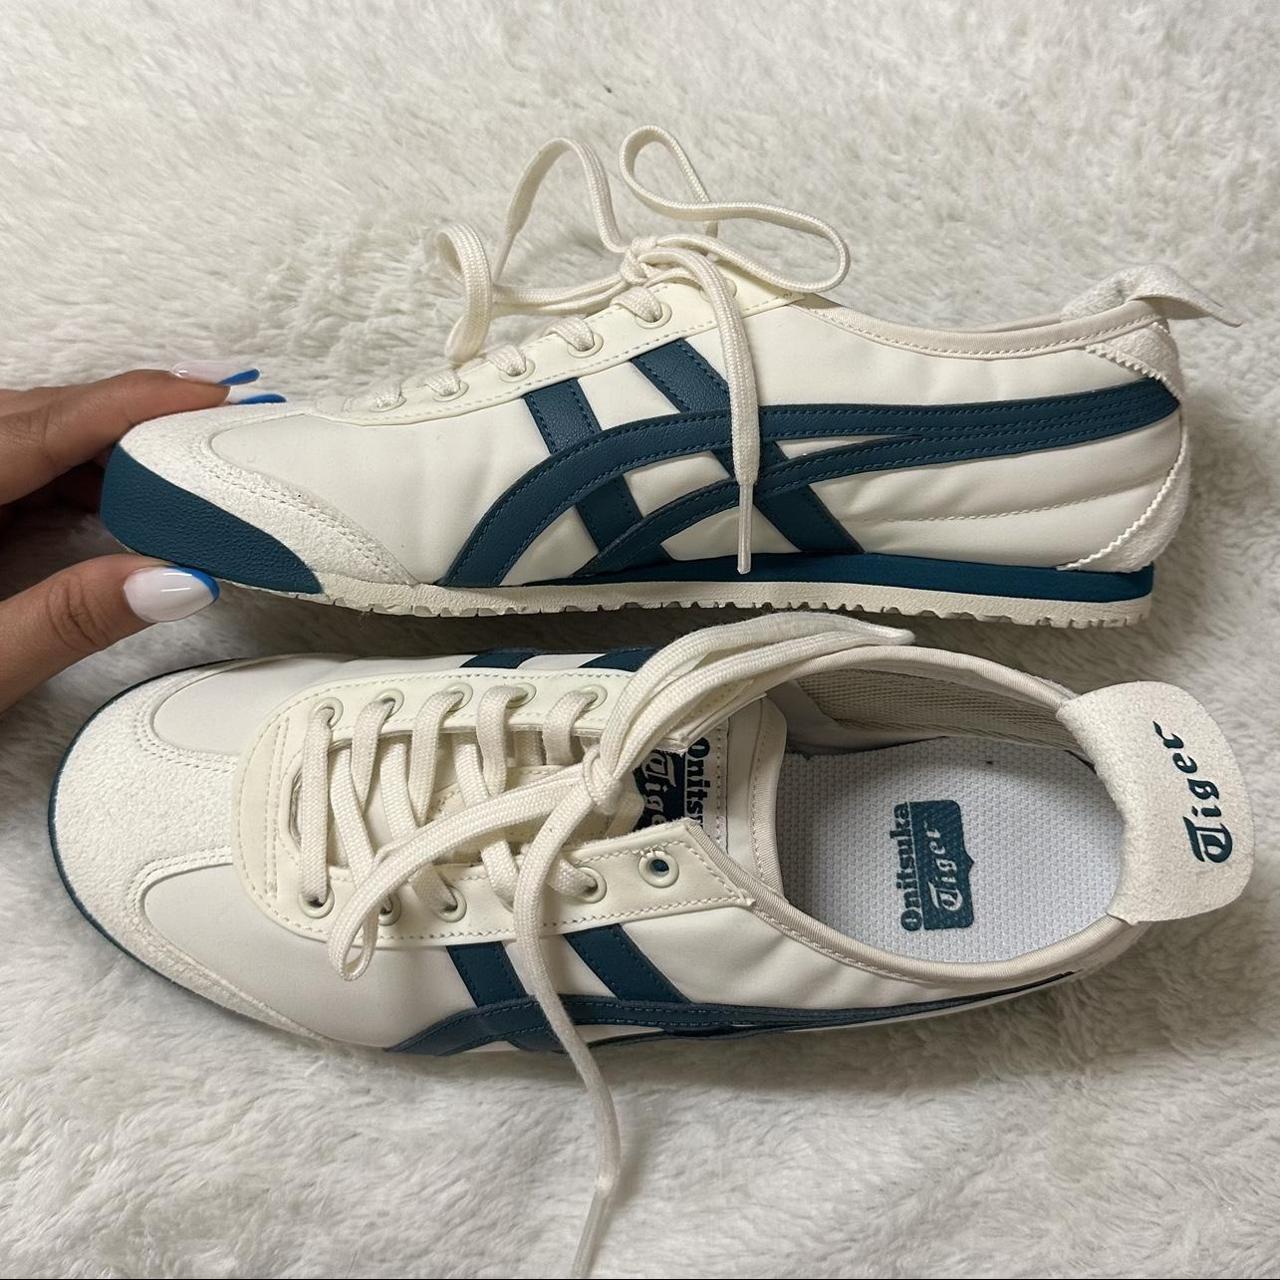 SOLD!!! Don’t buy! Green Onitsuka tiger shoes in... - Depop